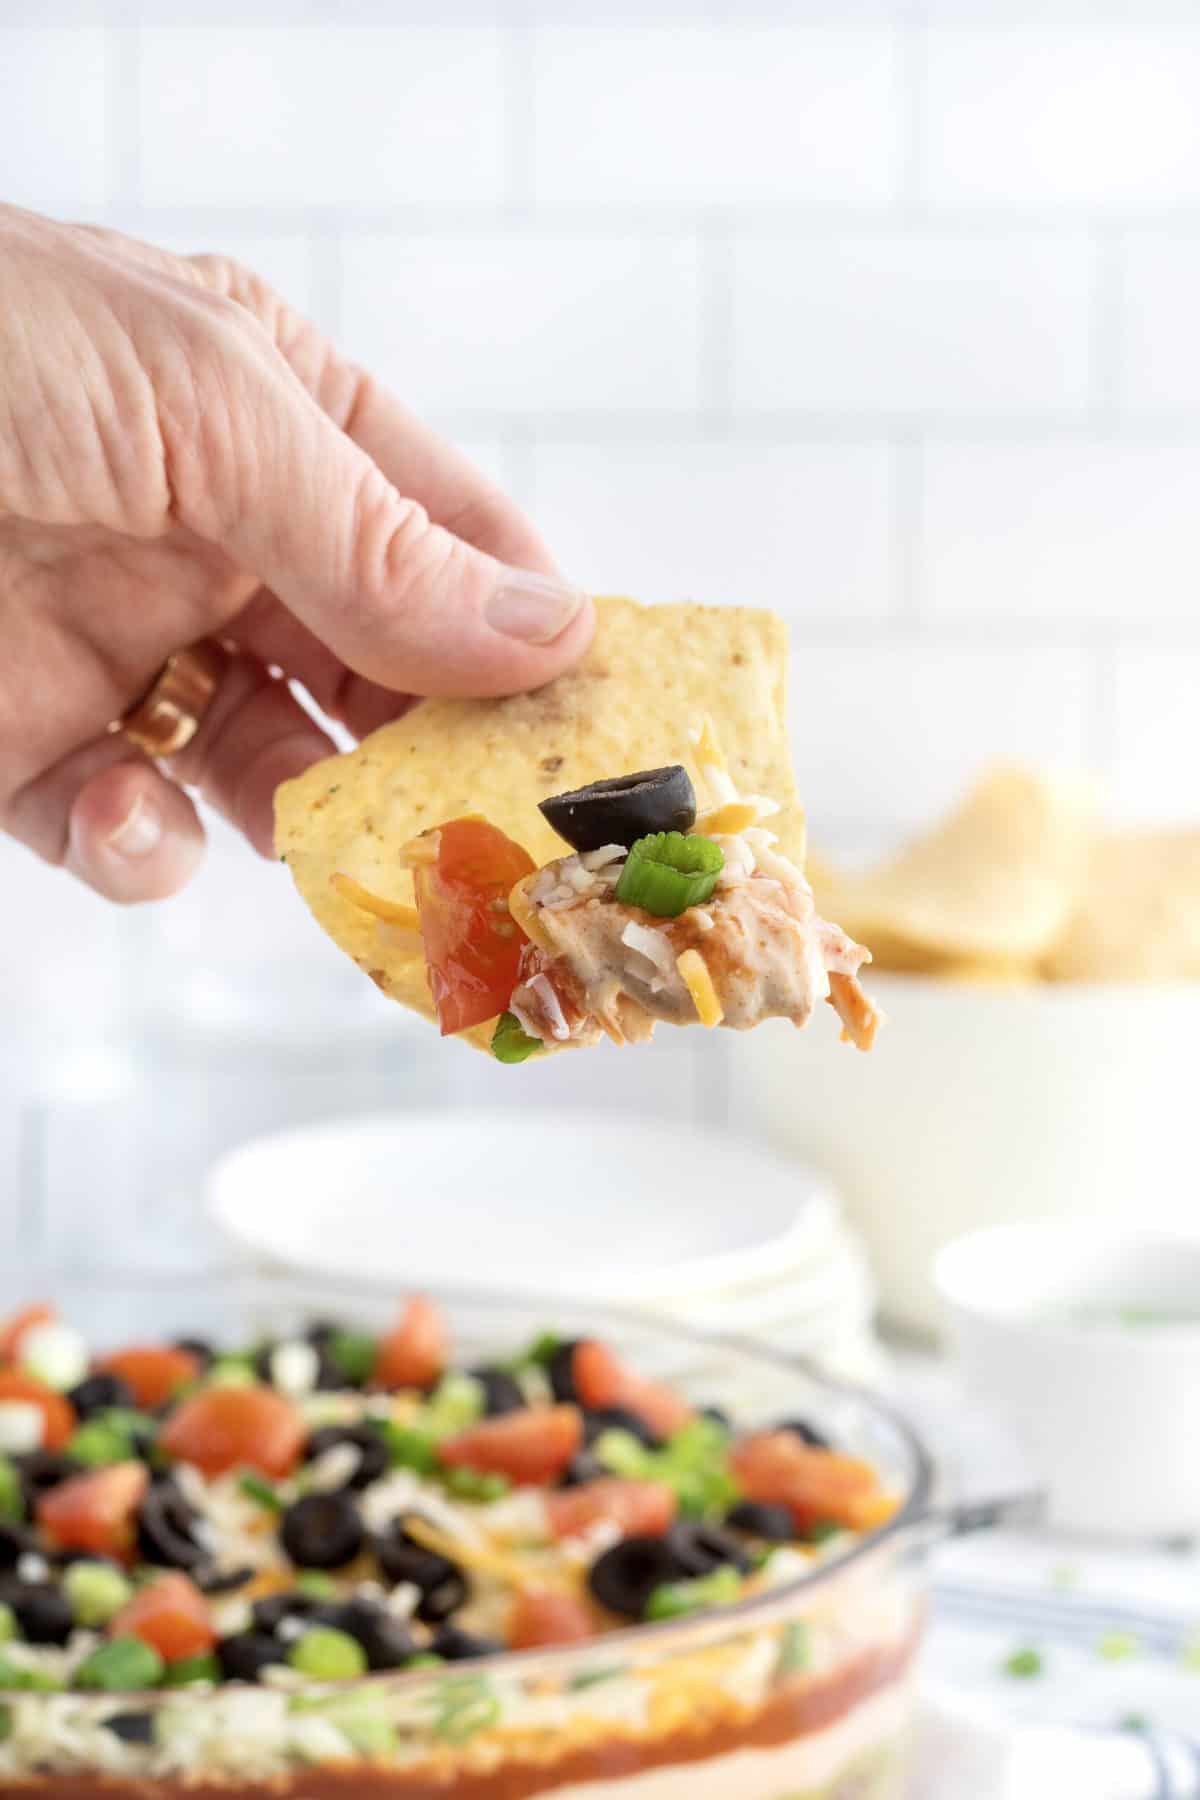 7-Layer Dip by The BakerMama